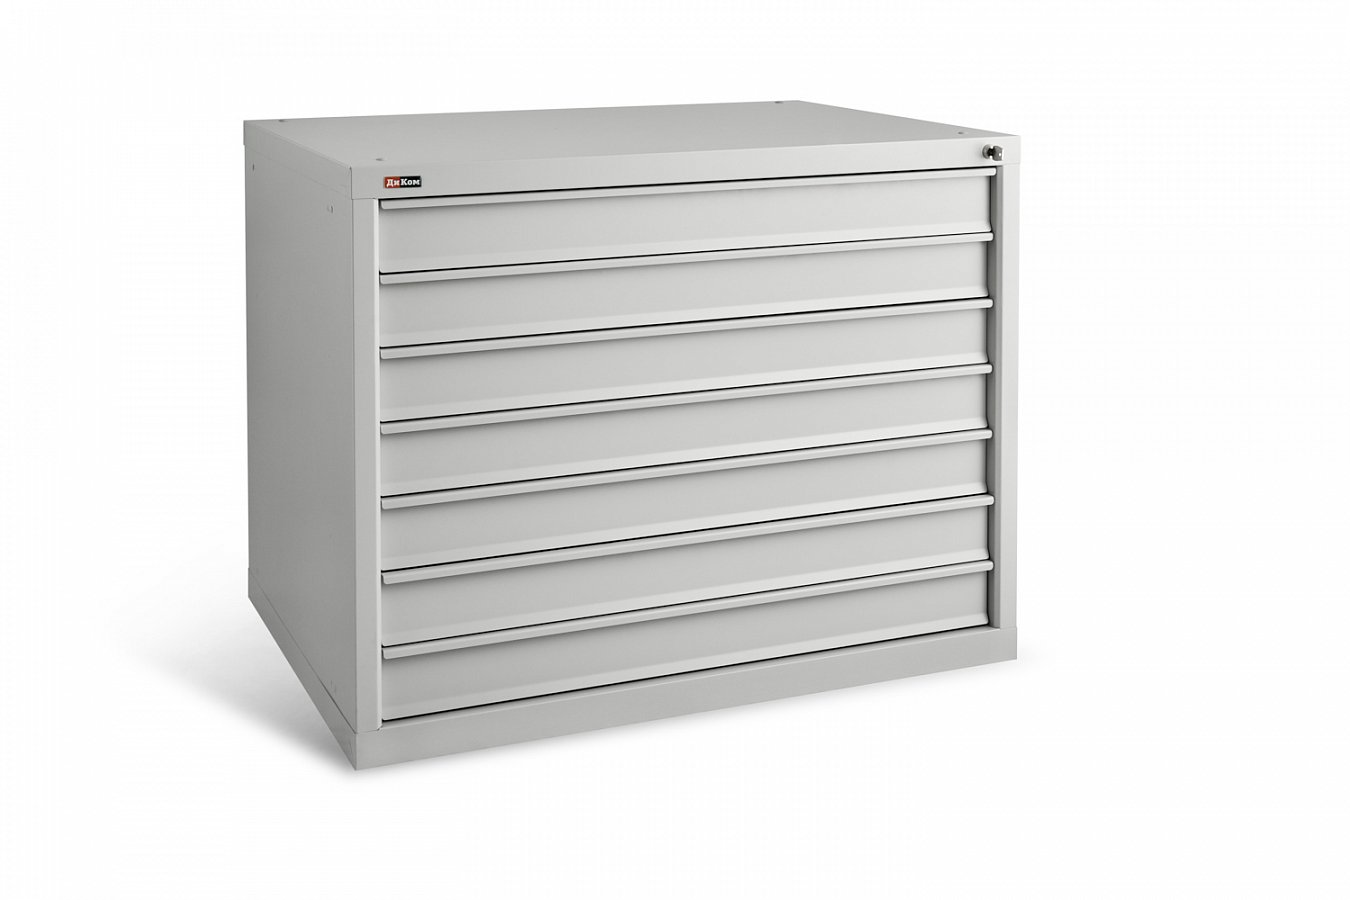 Large-size card filing cabinet DP-727